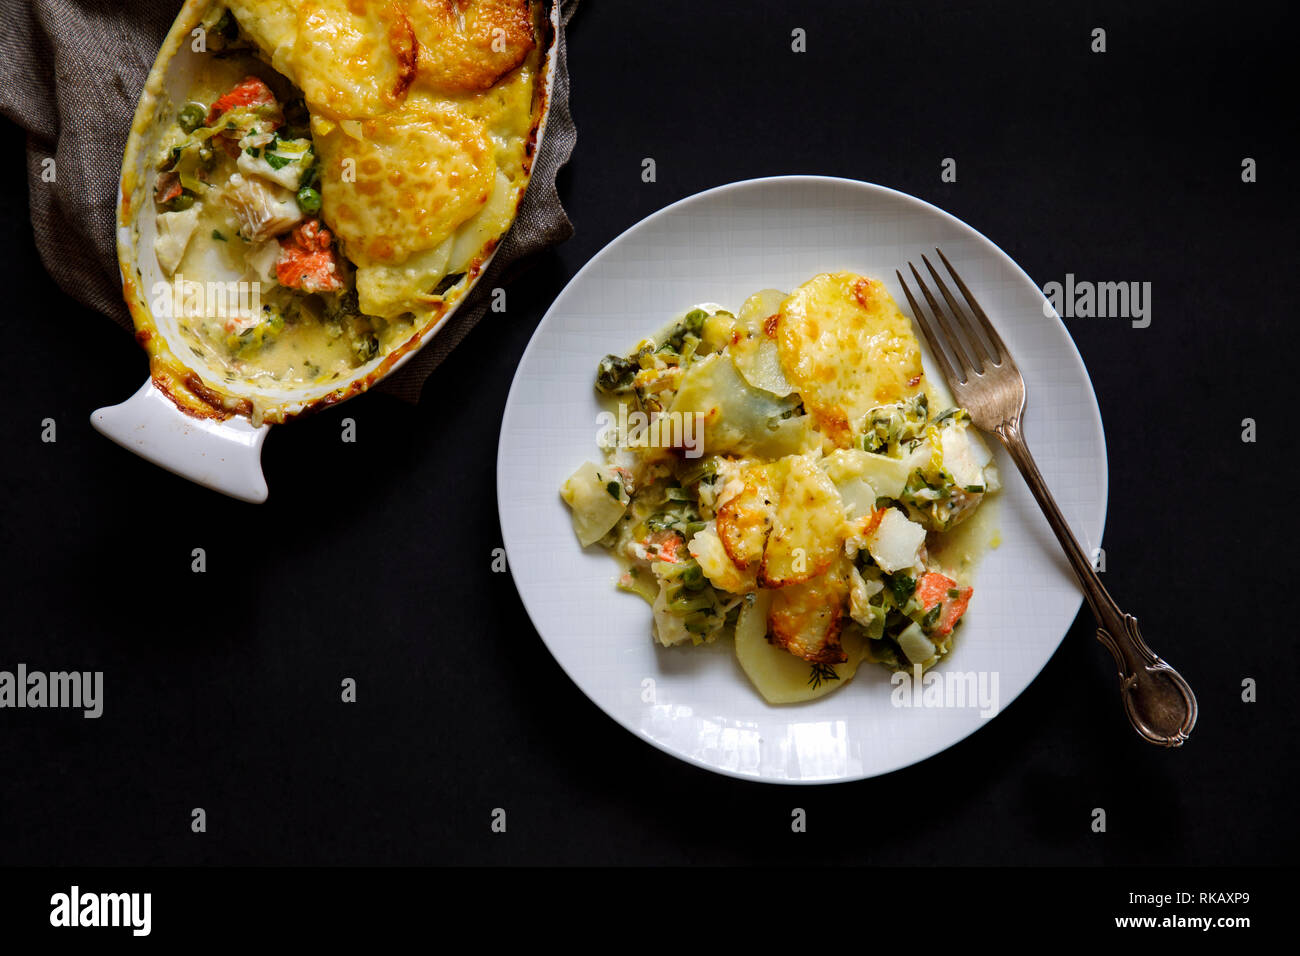 Fish pie with sliced potato topping Stock Photo